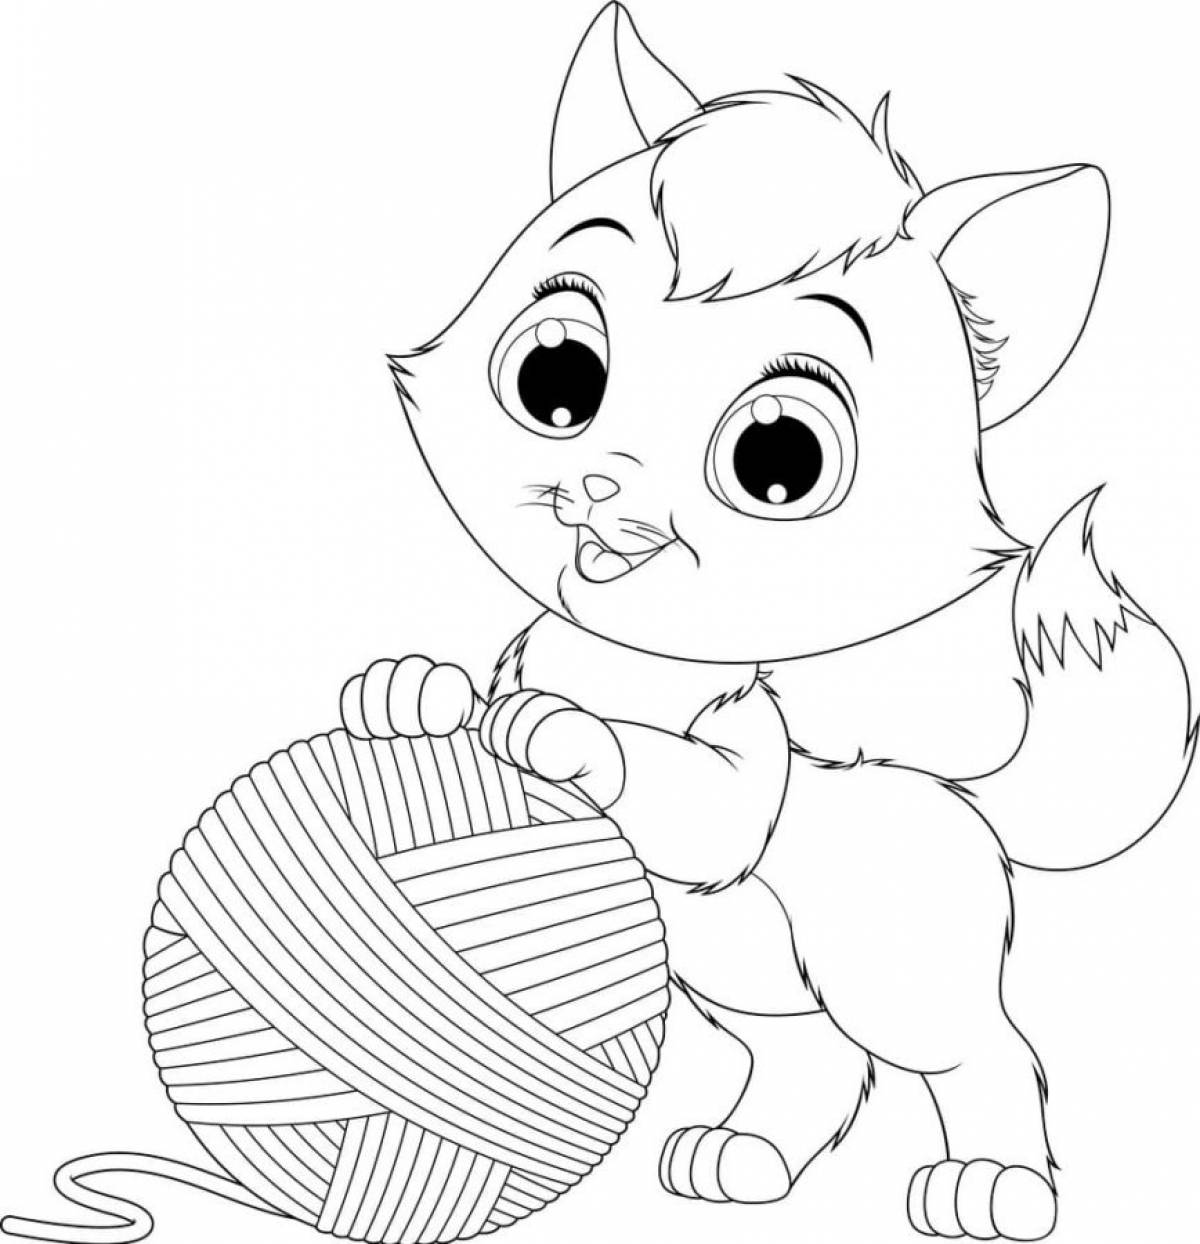 Coloring book calm cat with a ball